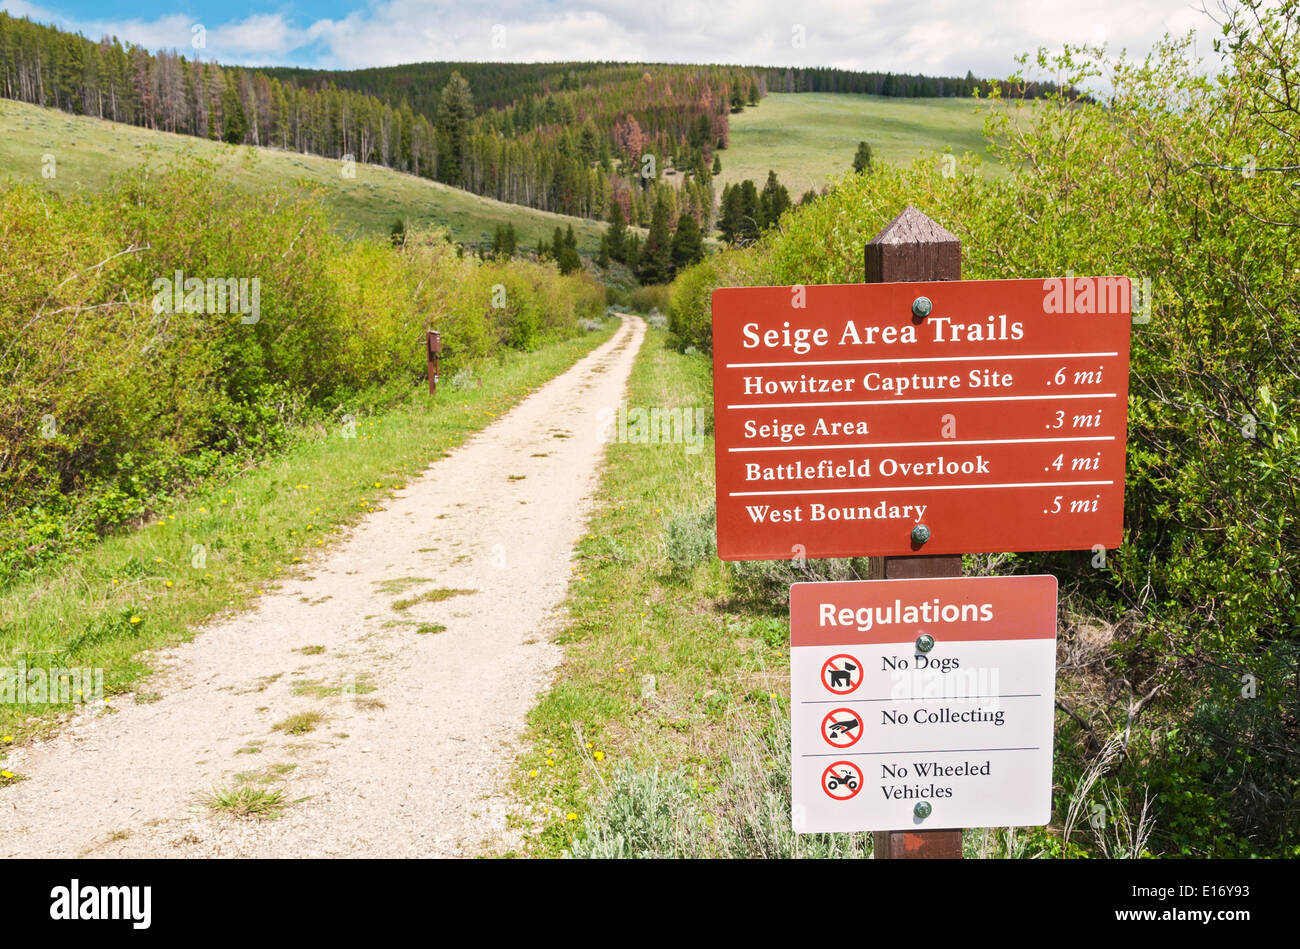 Montana, Big Hole National Battlefield, famous 1877 battle between Nez Perce Indians and U.S. Troops, siege area trail sign Stock Photo